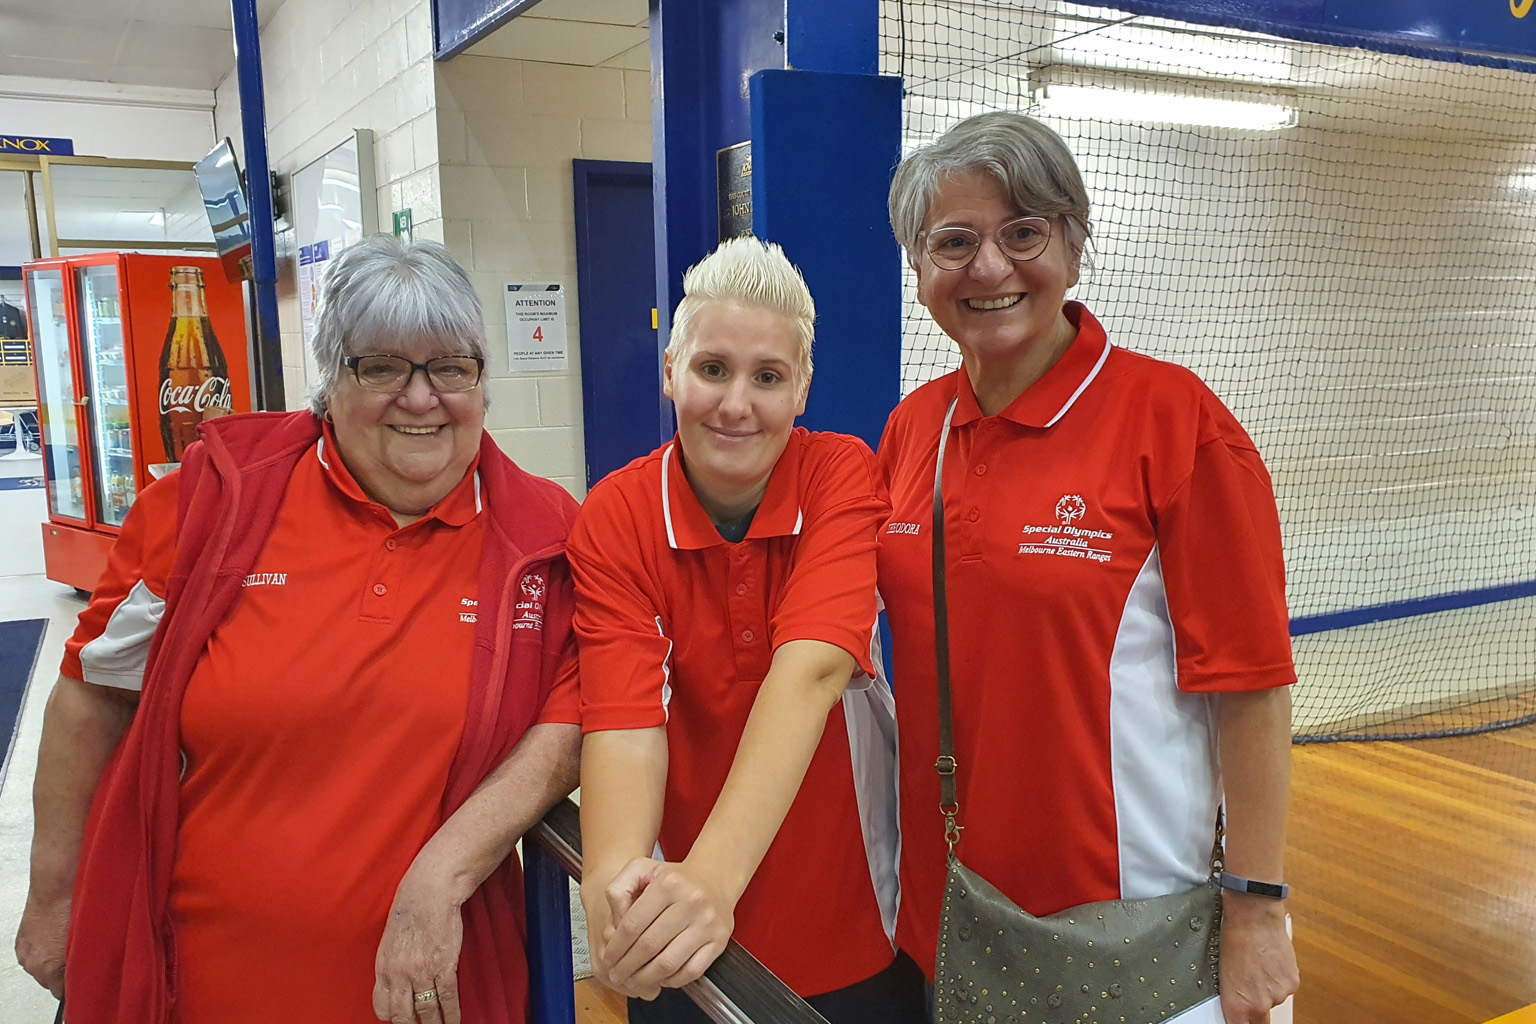 Three women stand together in an indoor sports facility wearing Special Olympics Australia Melbourne Eastern Rangers T-shirts